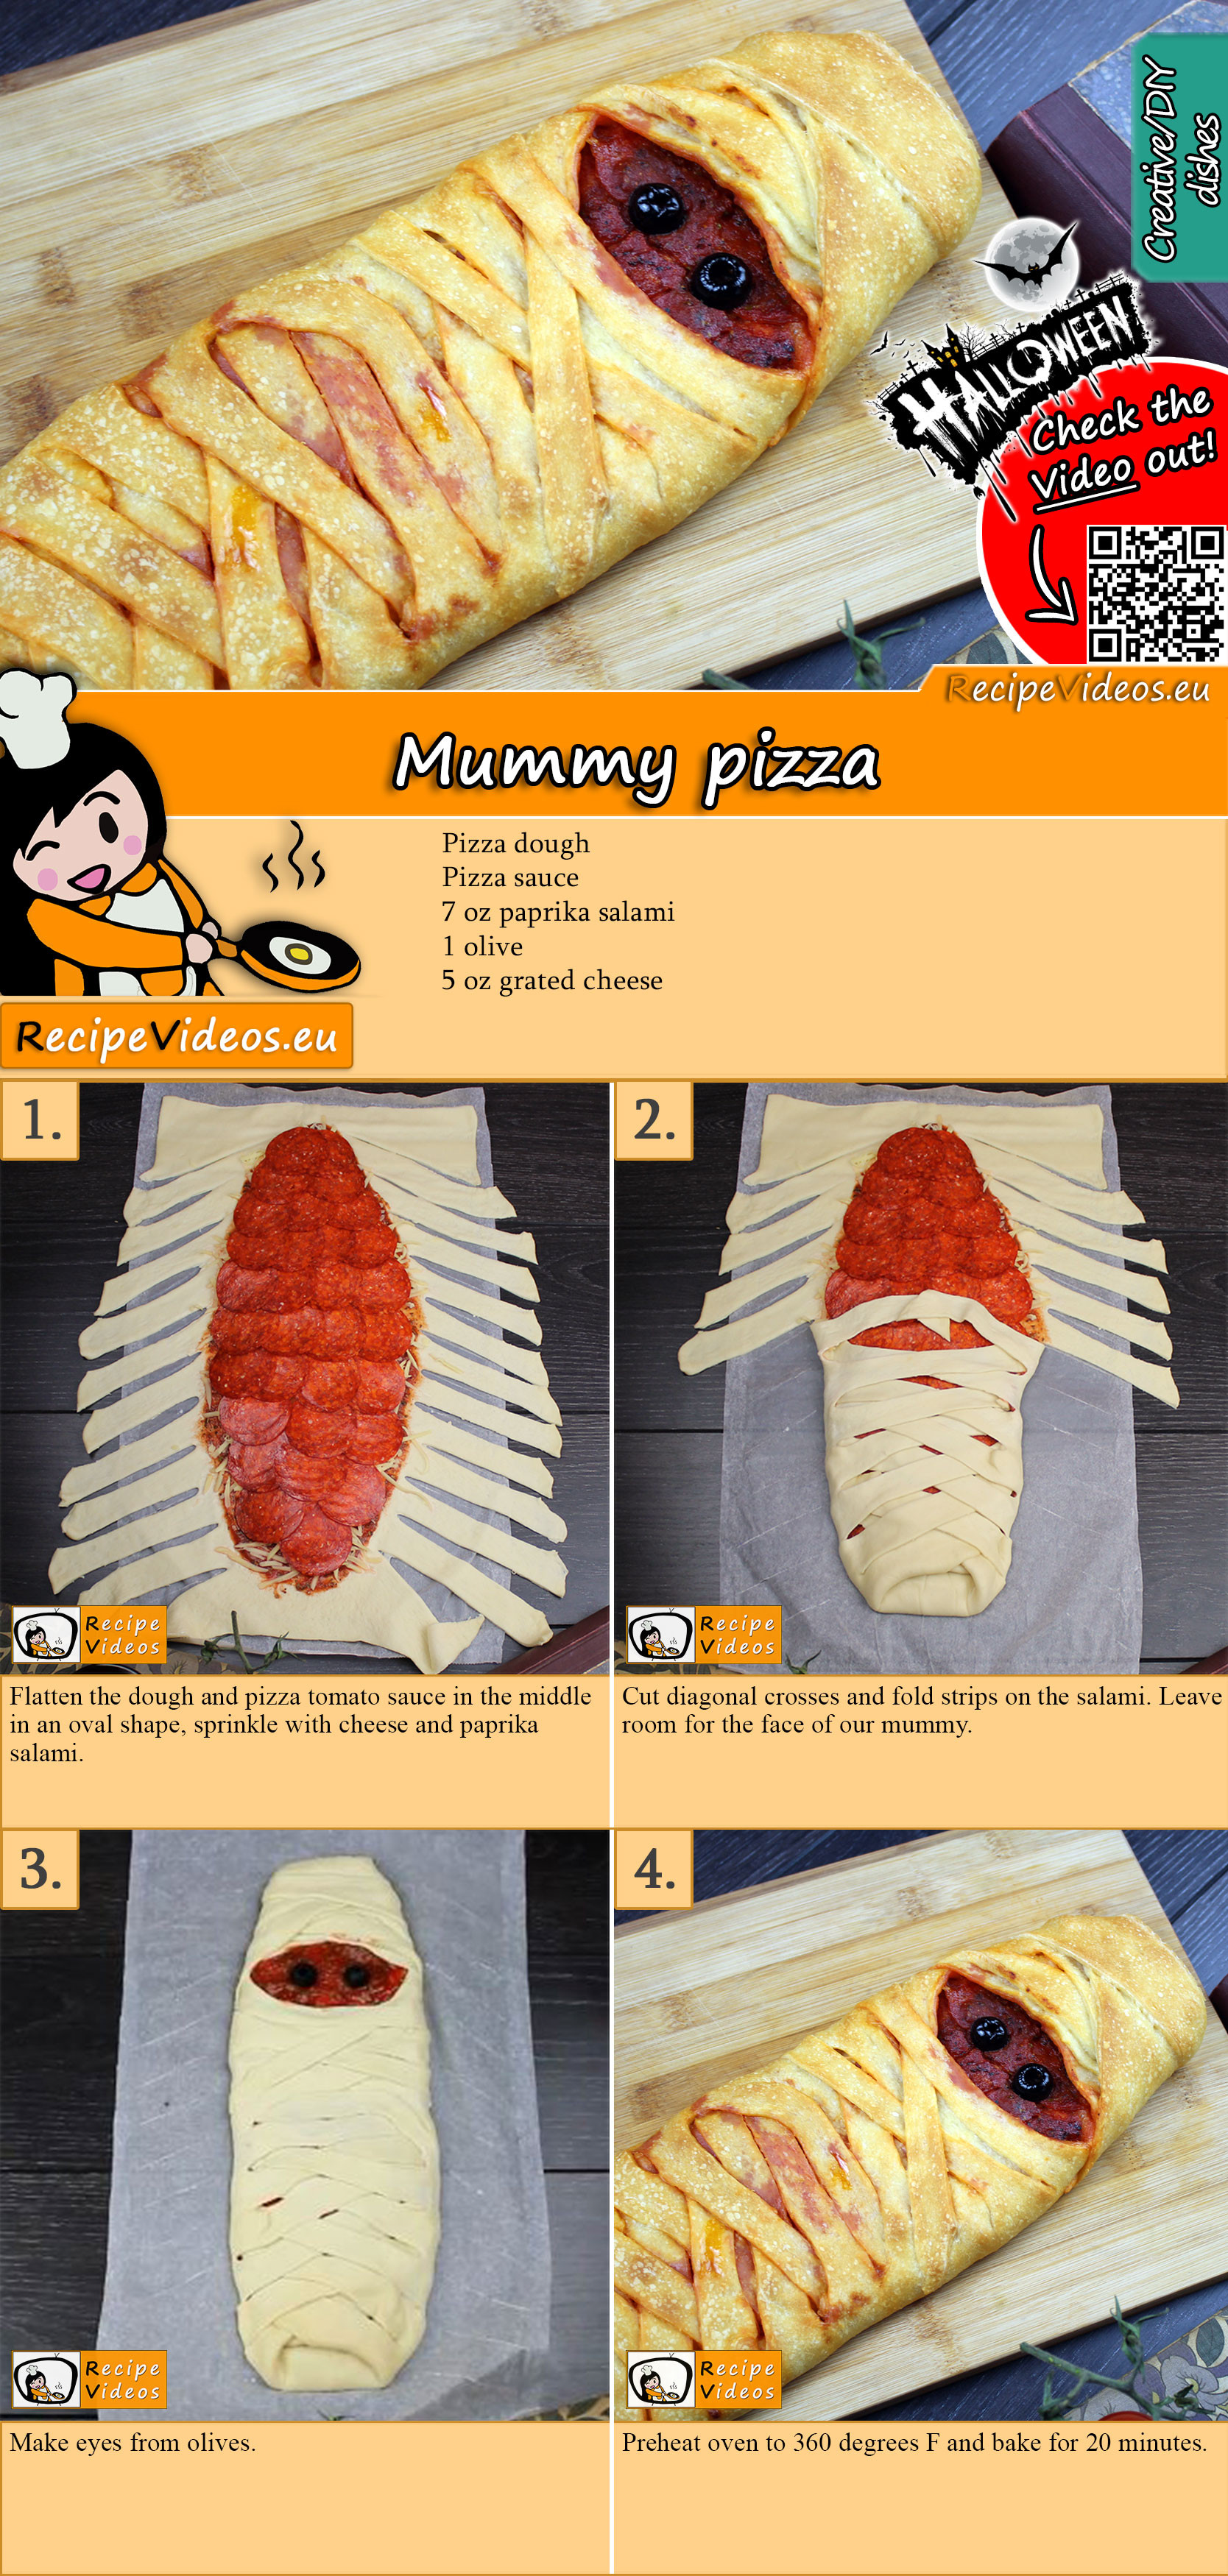 Mummy pizza recipe with video